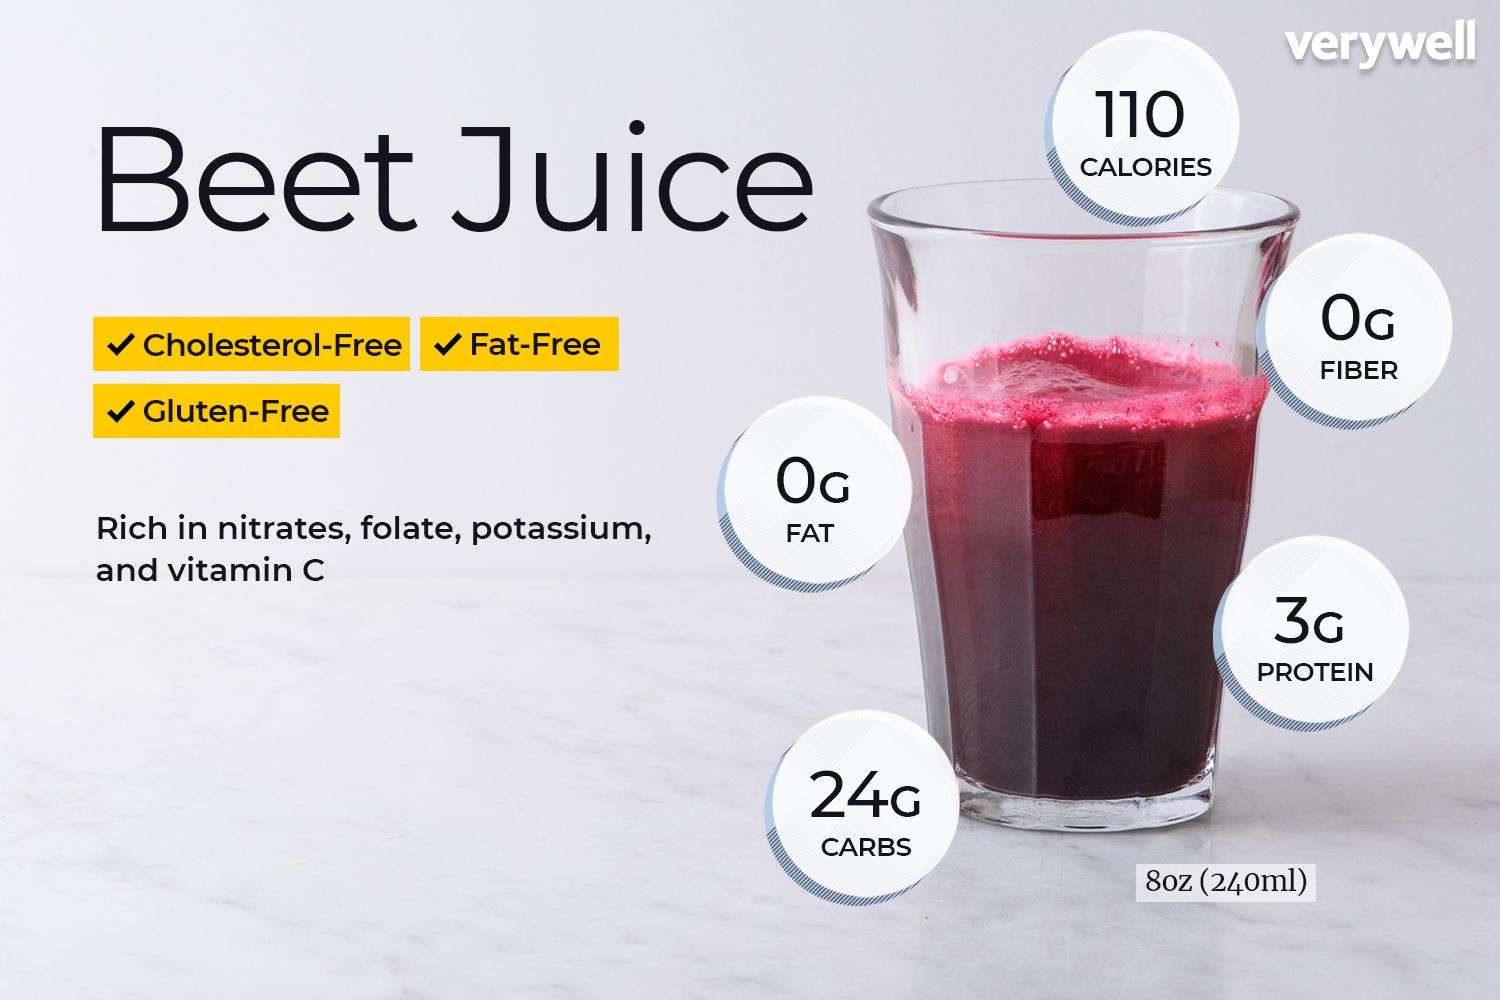 Beet juice nutrition facts